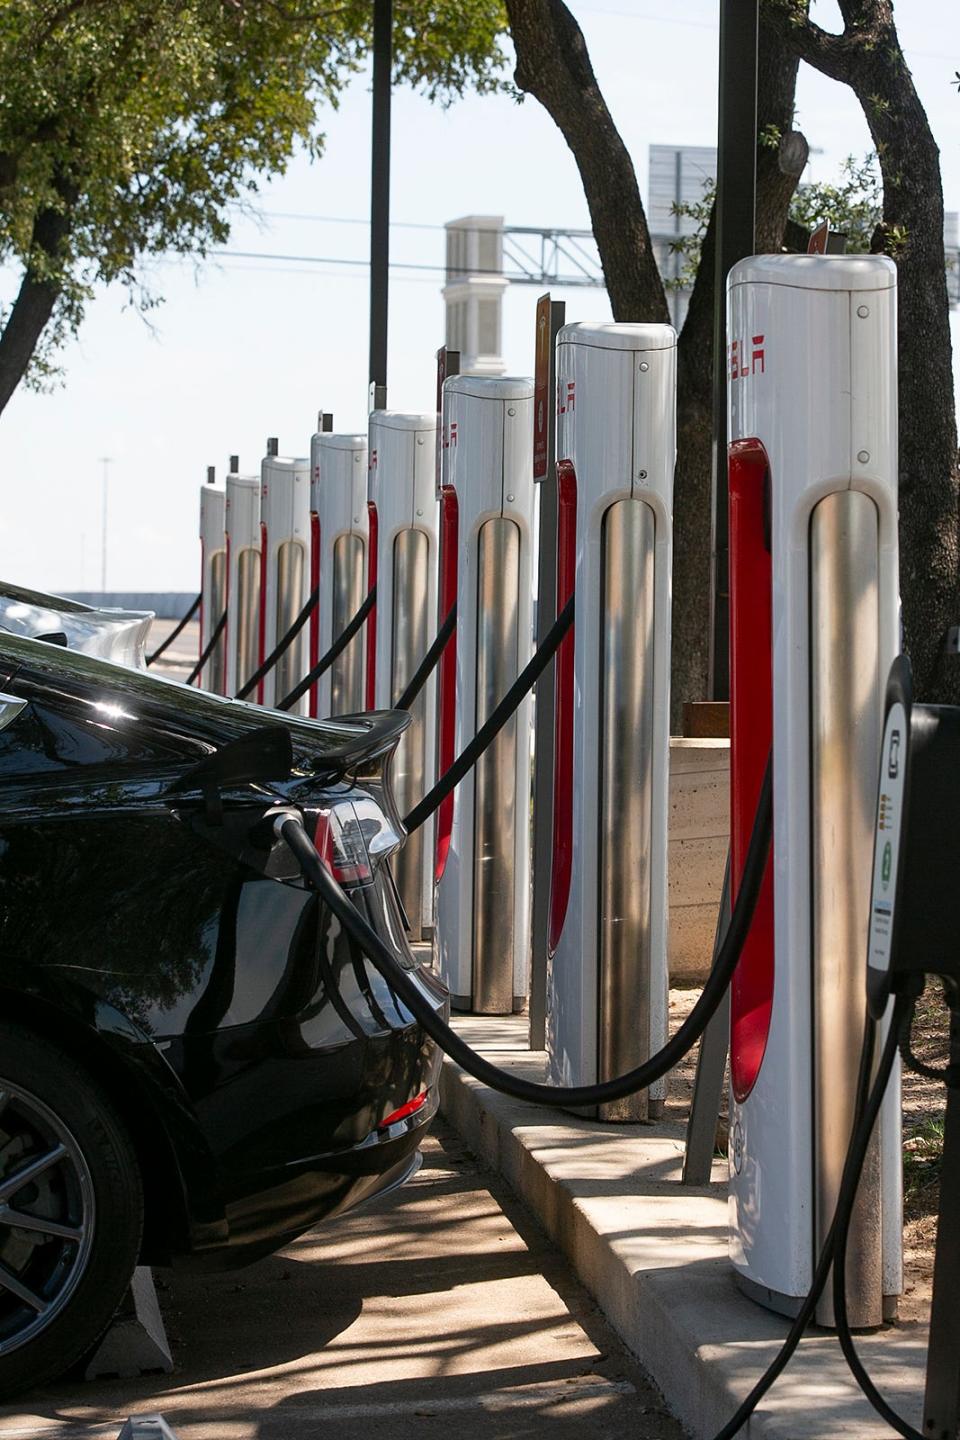 Electric vehicles charge at the Tesla supercharger station in Austin, Texas on Friday, July 1, 2022.